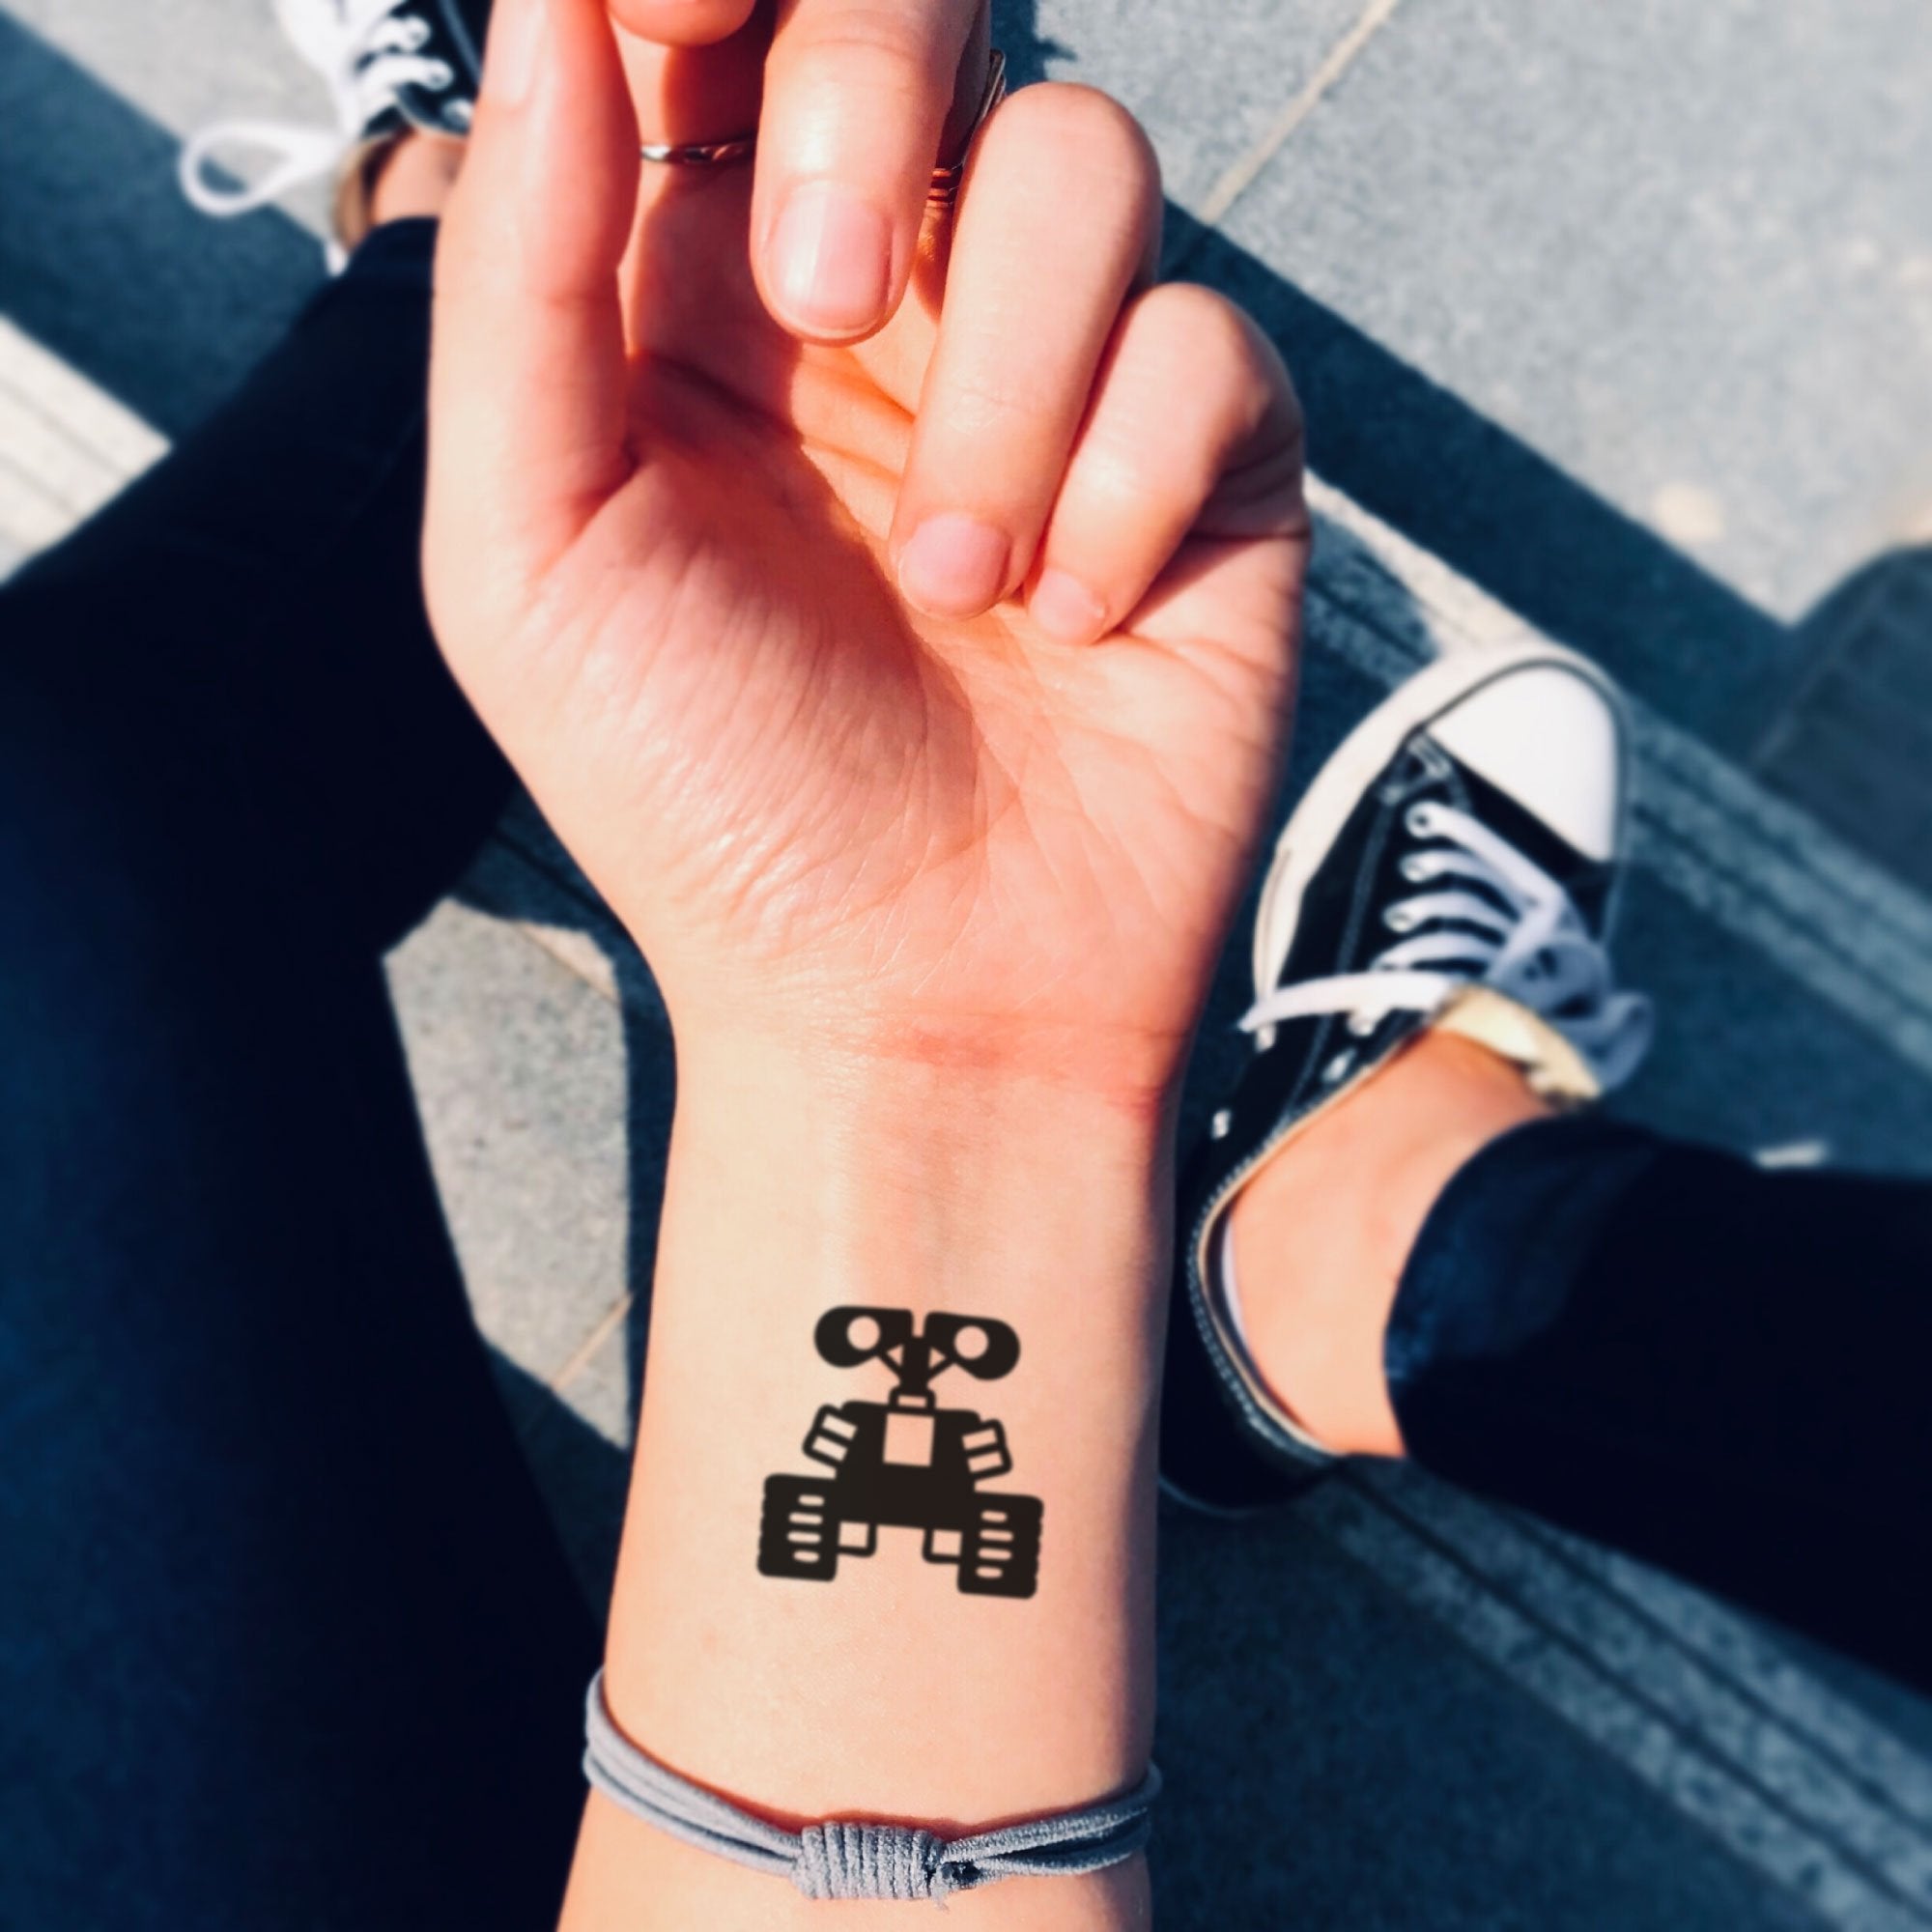 100 Waterproof Nordic Temporary Tattoos Star, Heart, Key, Alphabet Cross  Simple Wrist And Neck Art For Men And Women Fake Finger Stickers Item  #230811 From Ning06, $14.1 | DHgate.Com